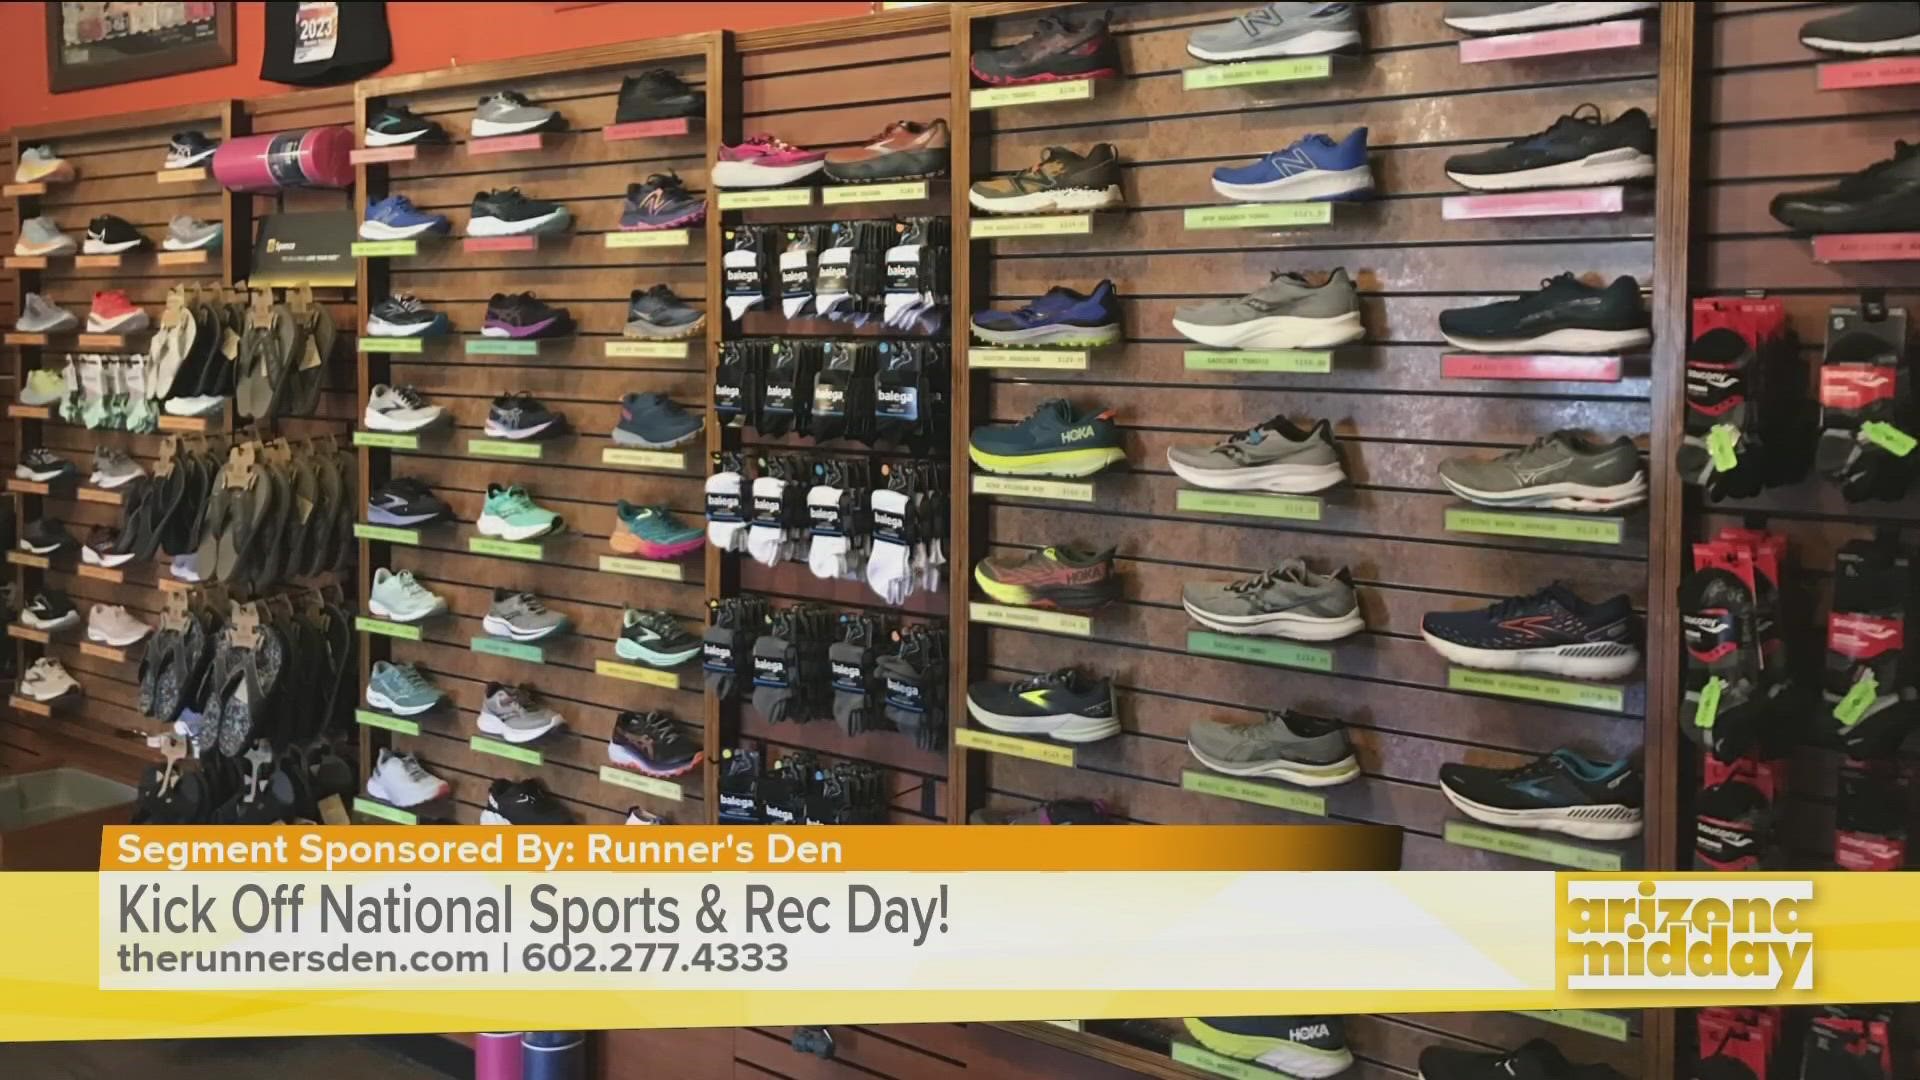 If you're worried about not having the right shoes for the weekly "Easy Breezy Group Run," Runner's Den will help you find the perfect fit for your running style!